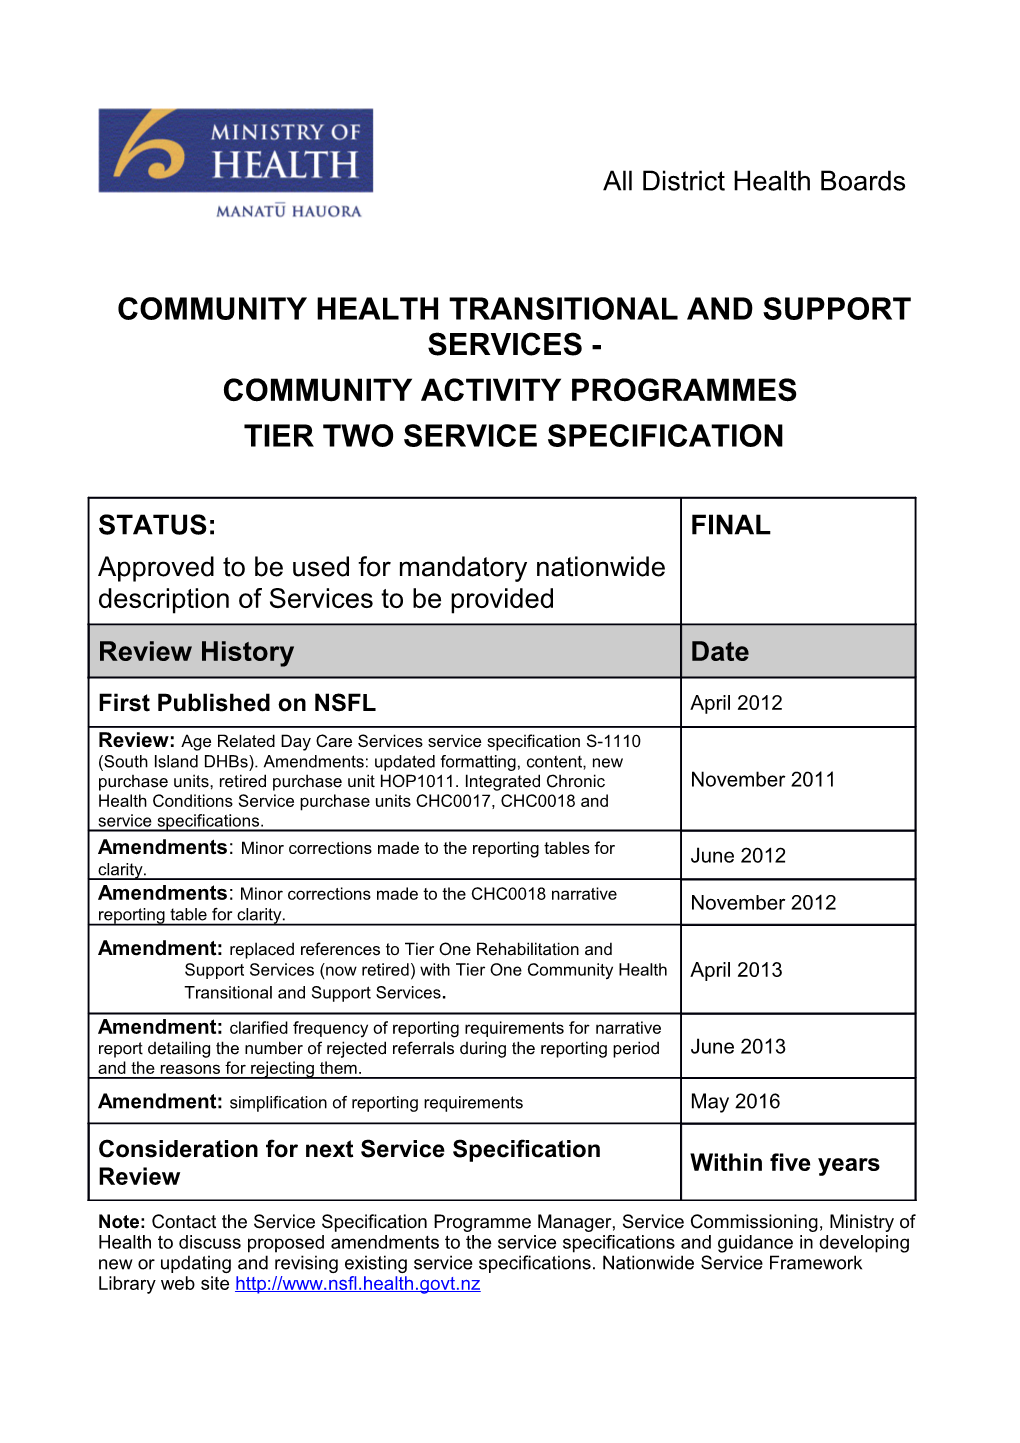 Community Health Transitional and Support Services Community Activity Programmes: Tier